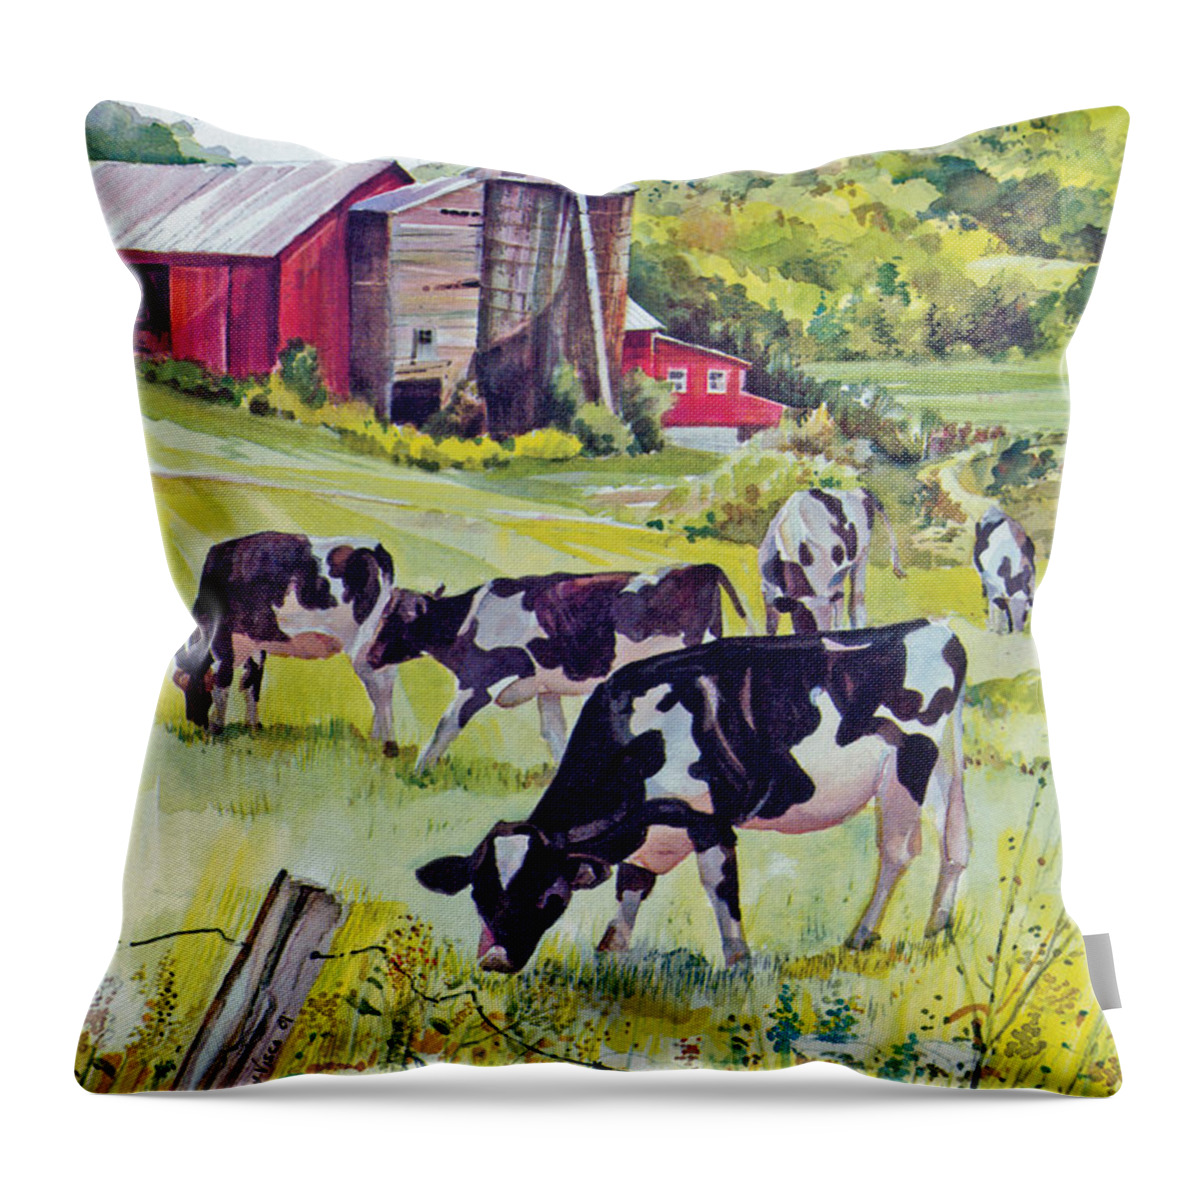 Cows Throw Pillow featuring the painting Old Farm by P Anthony Visco